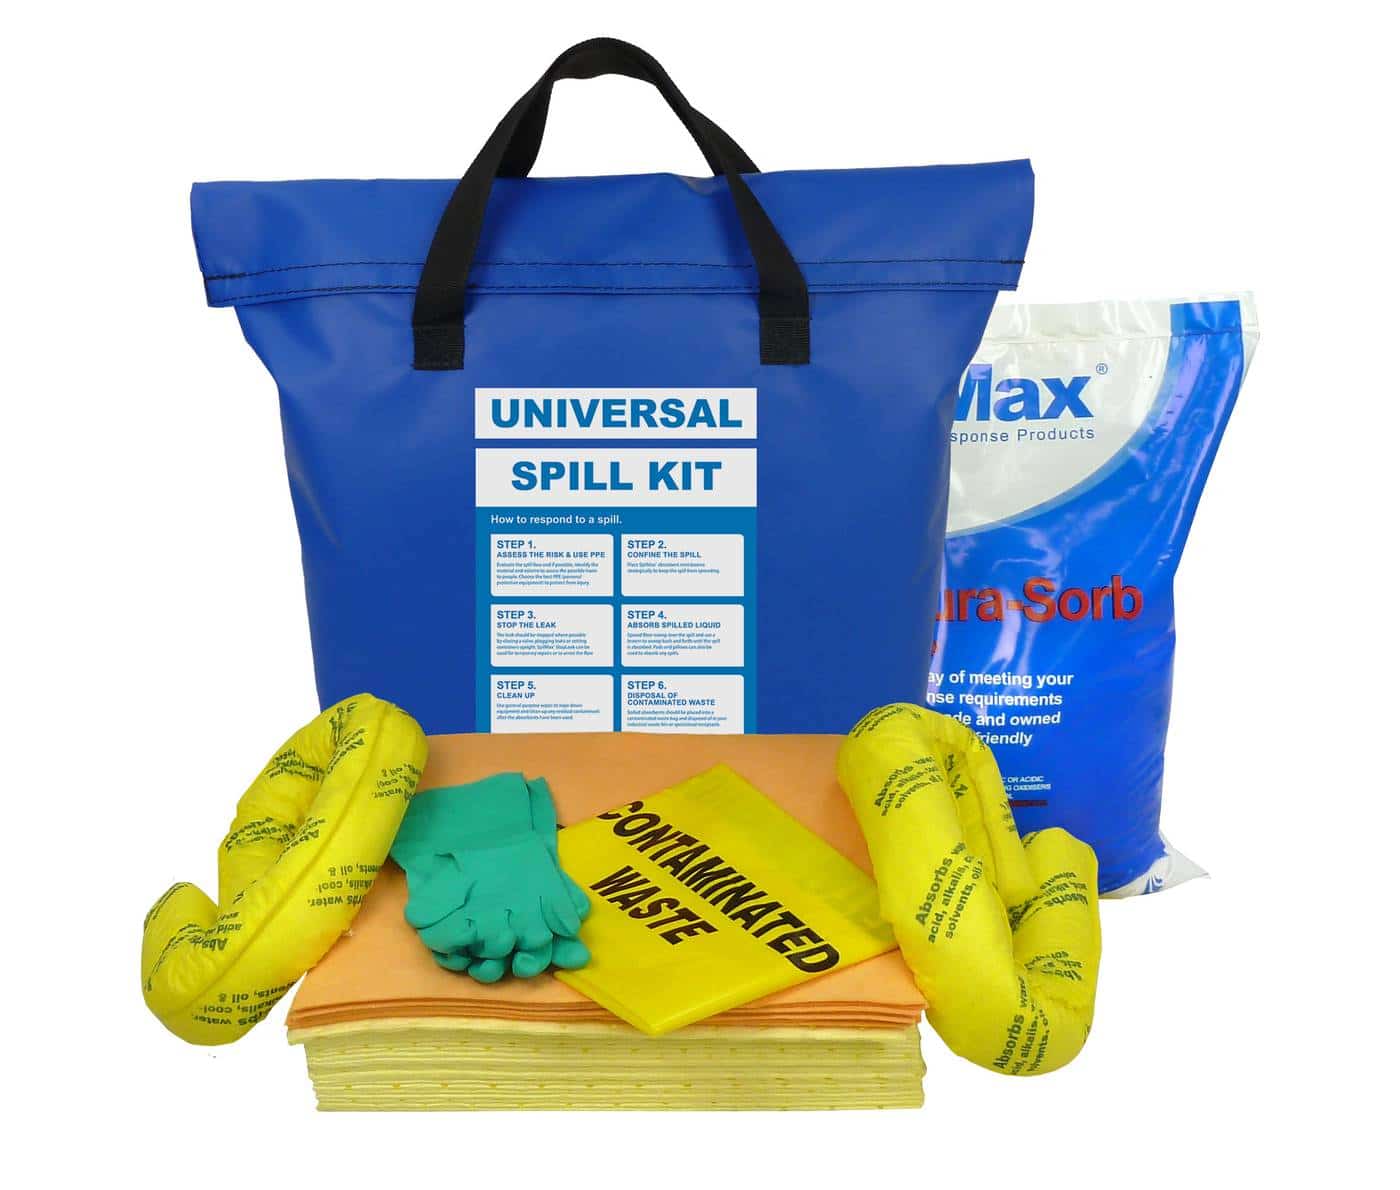 SpilMax 60L Universal Vehicle Spill Kit Bag with contents showing